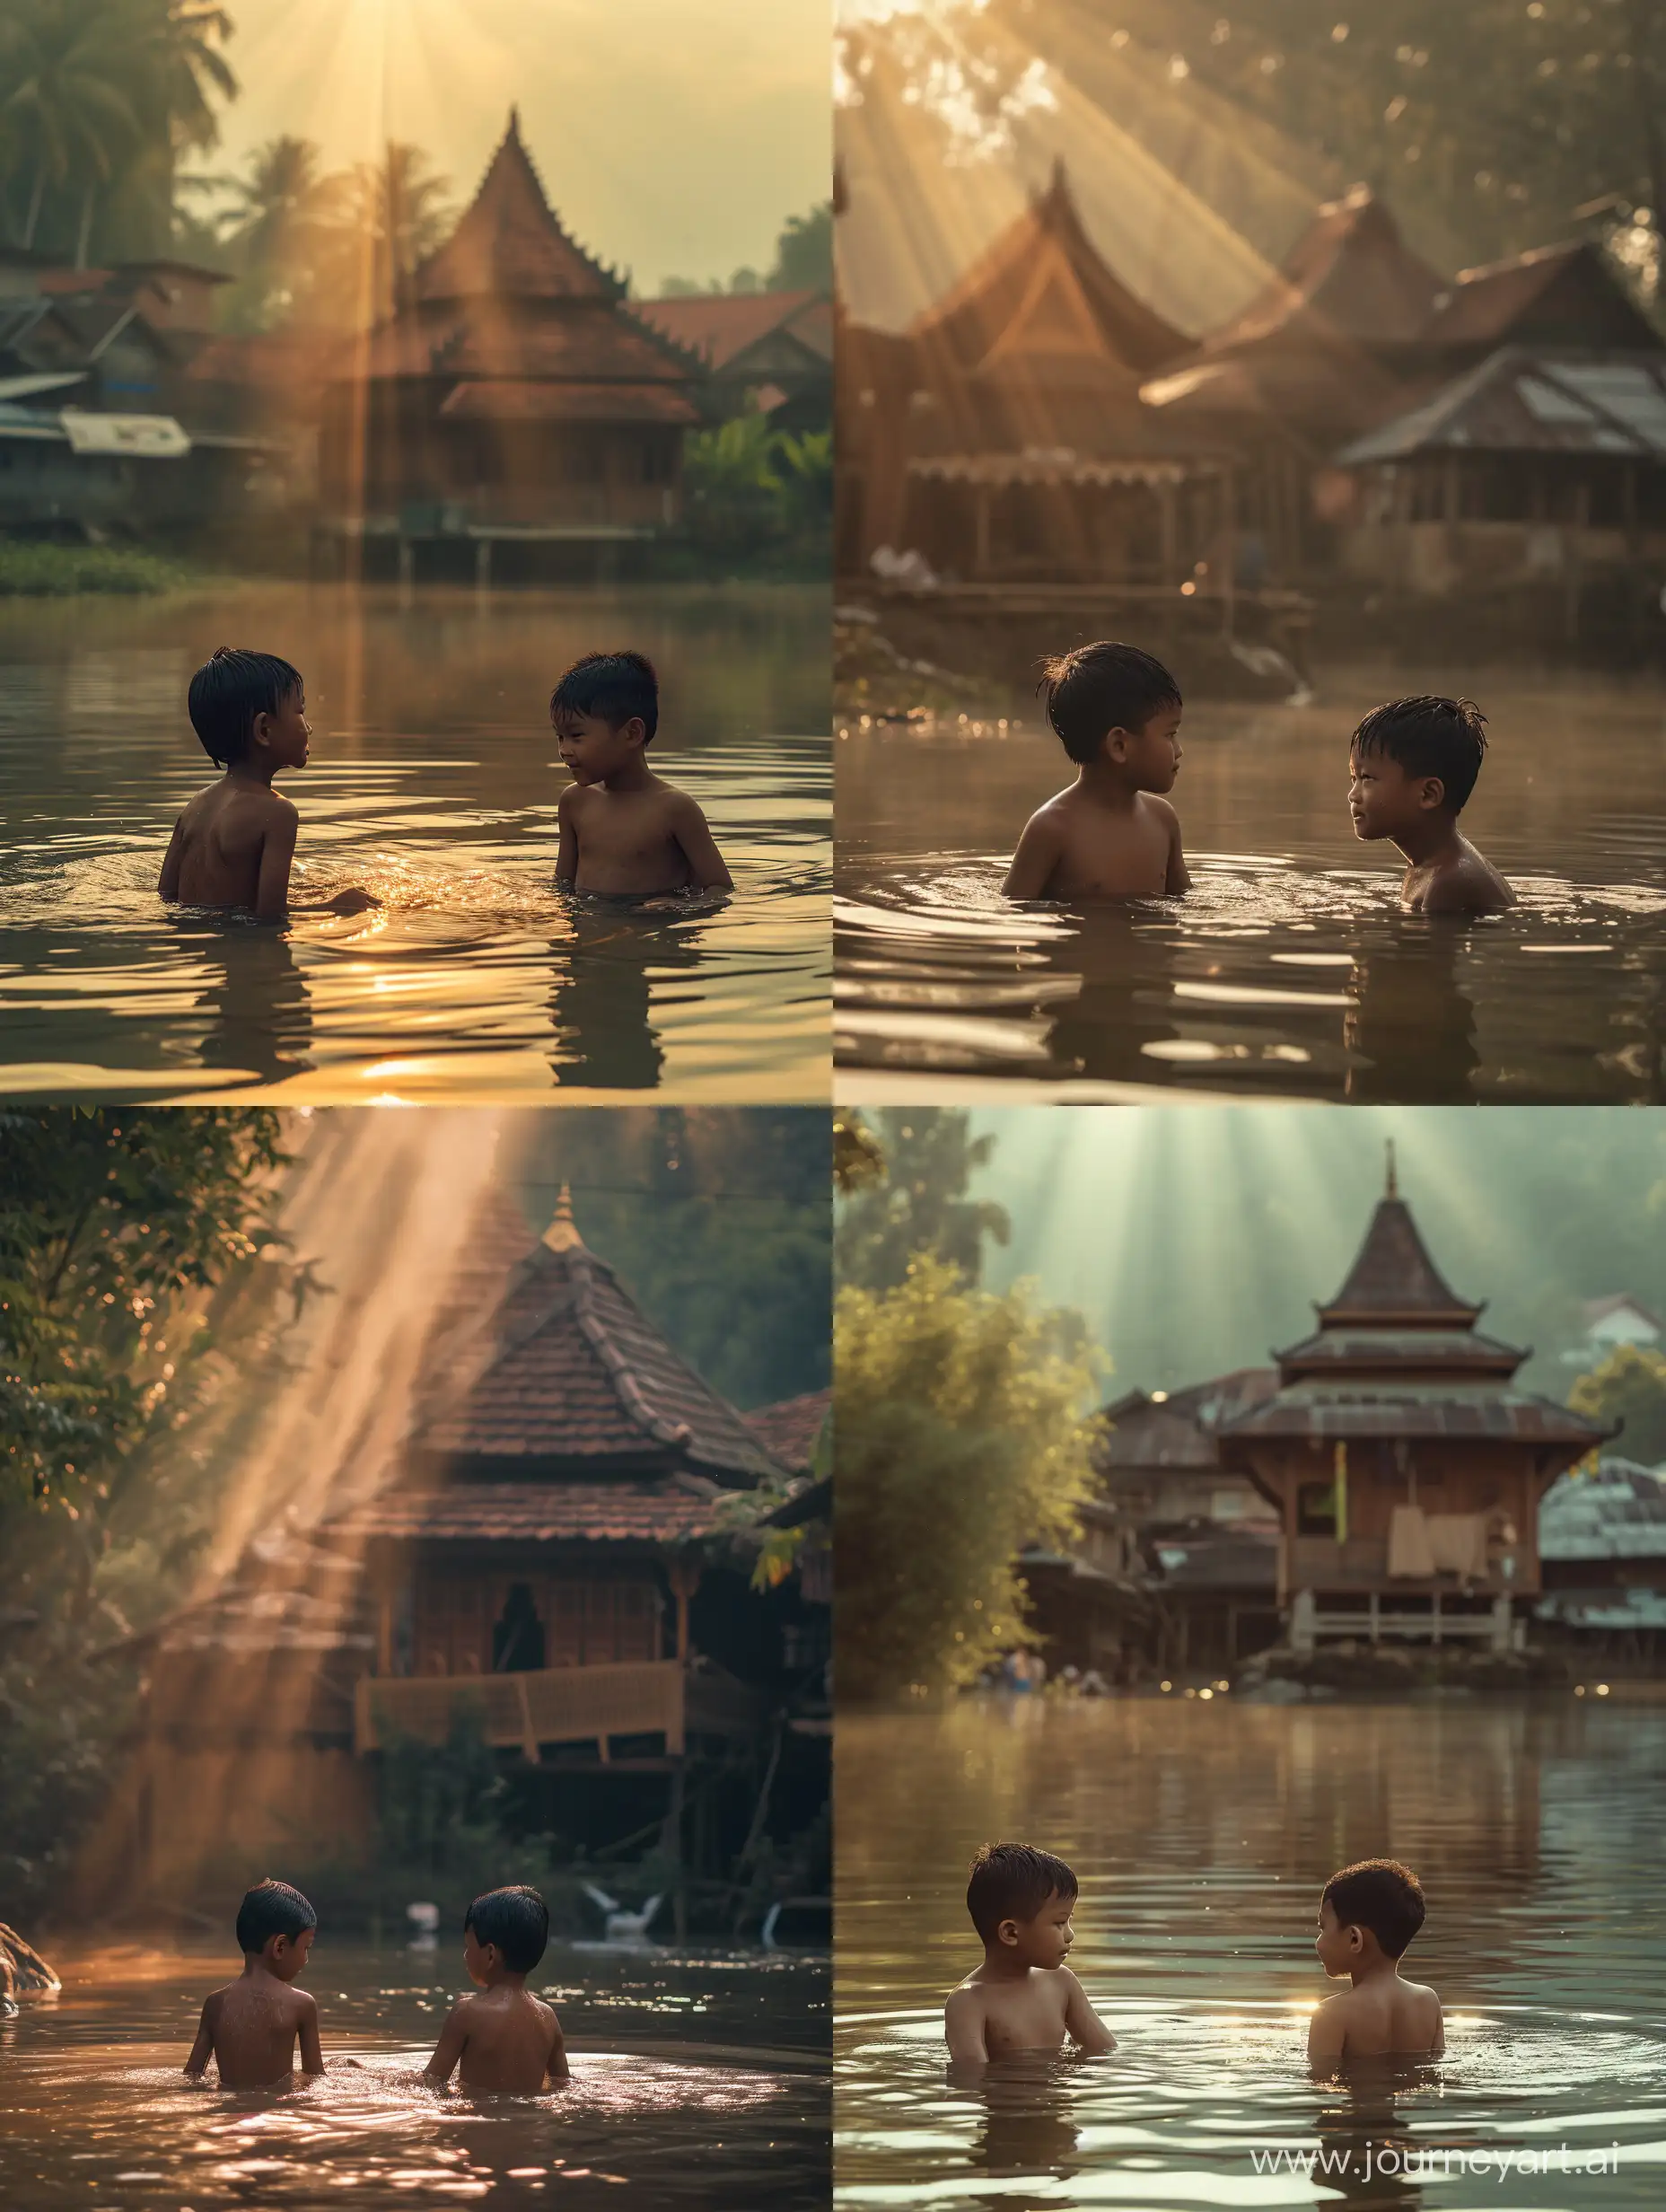 Traditional-Morning-Bathing-Scene-of-Two-Malay-Boys-in-River